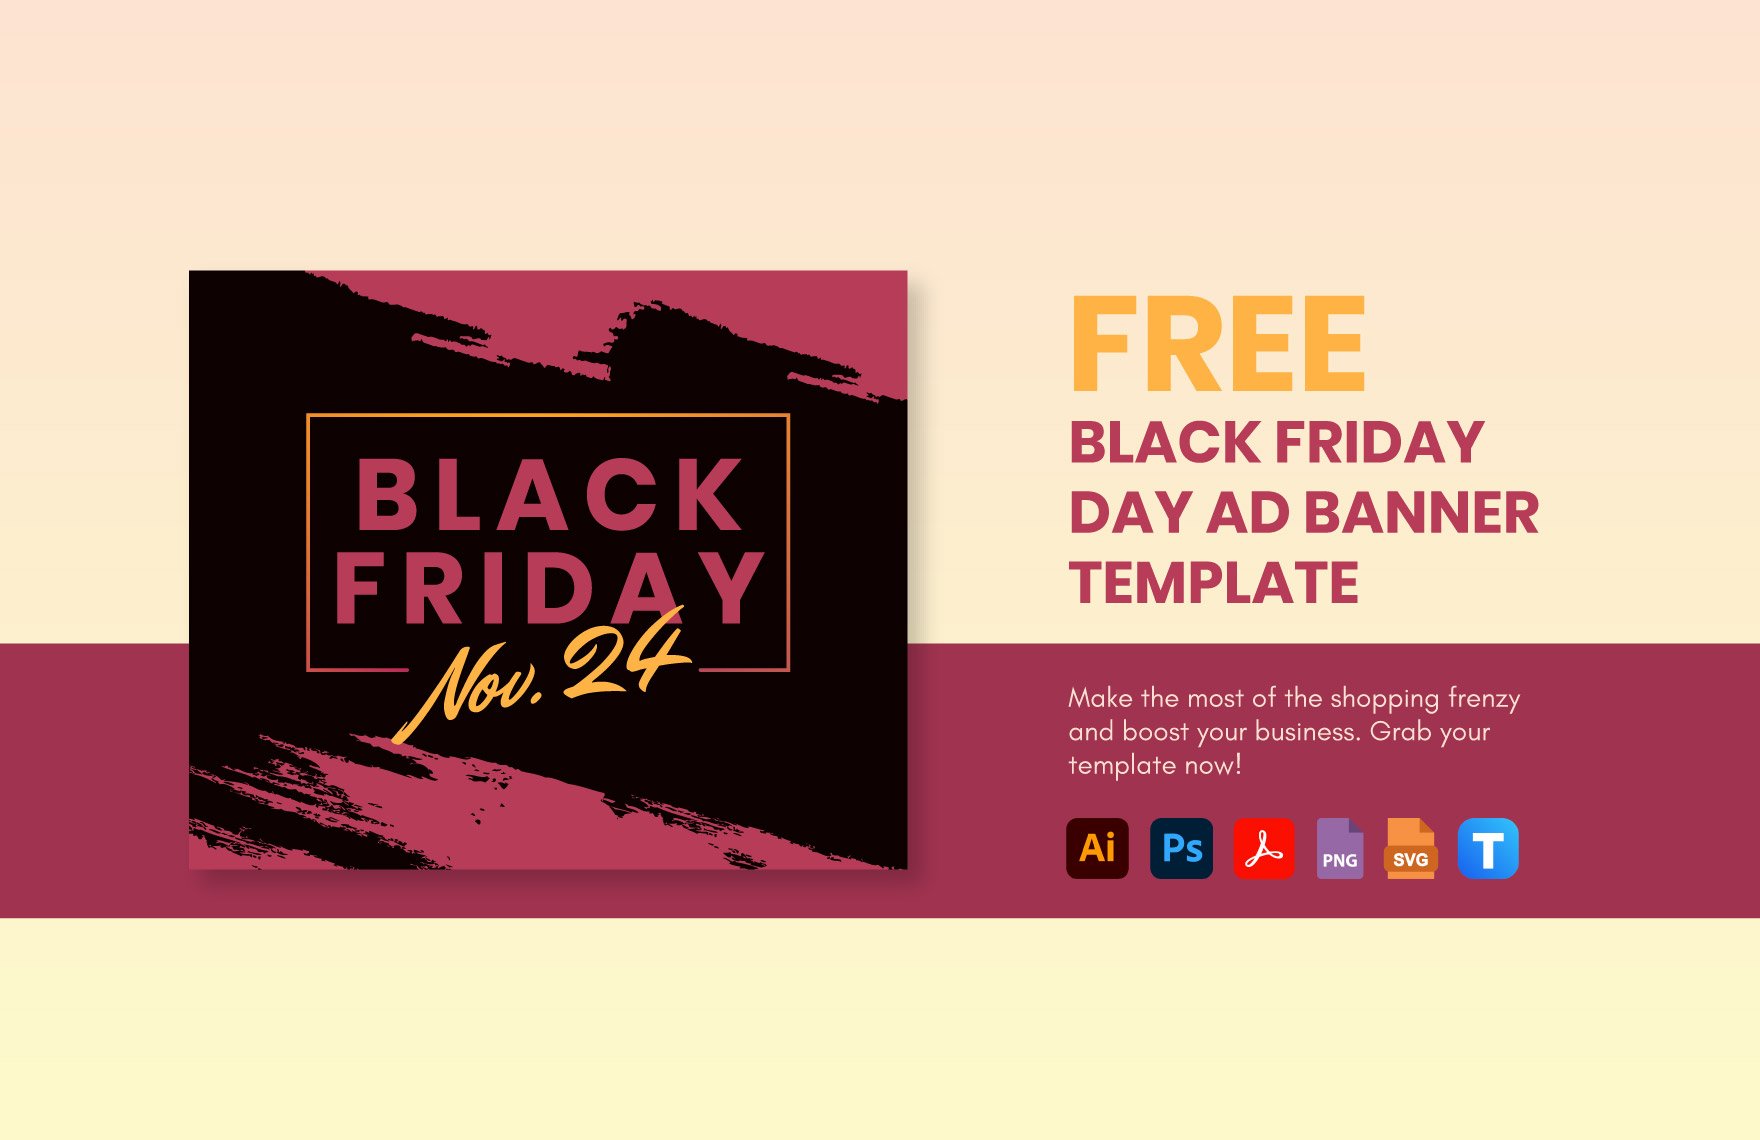 Black Friday Ad Banner Template